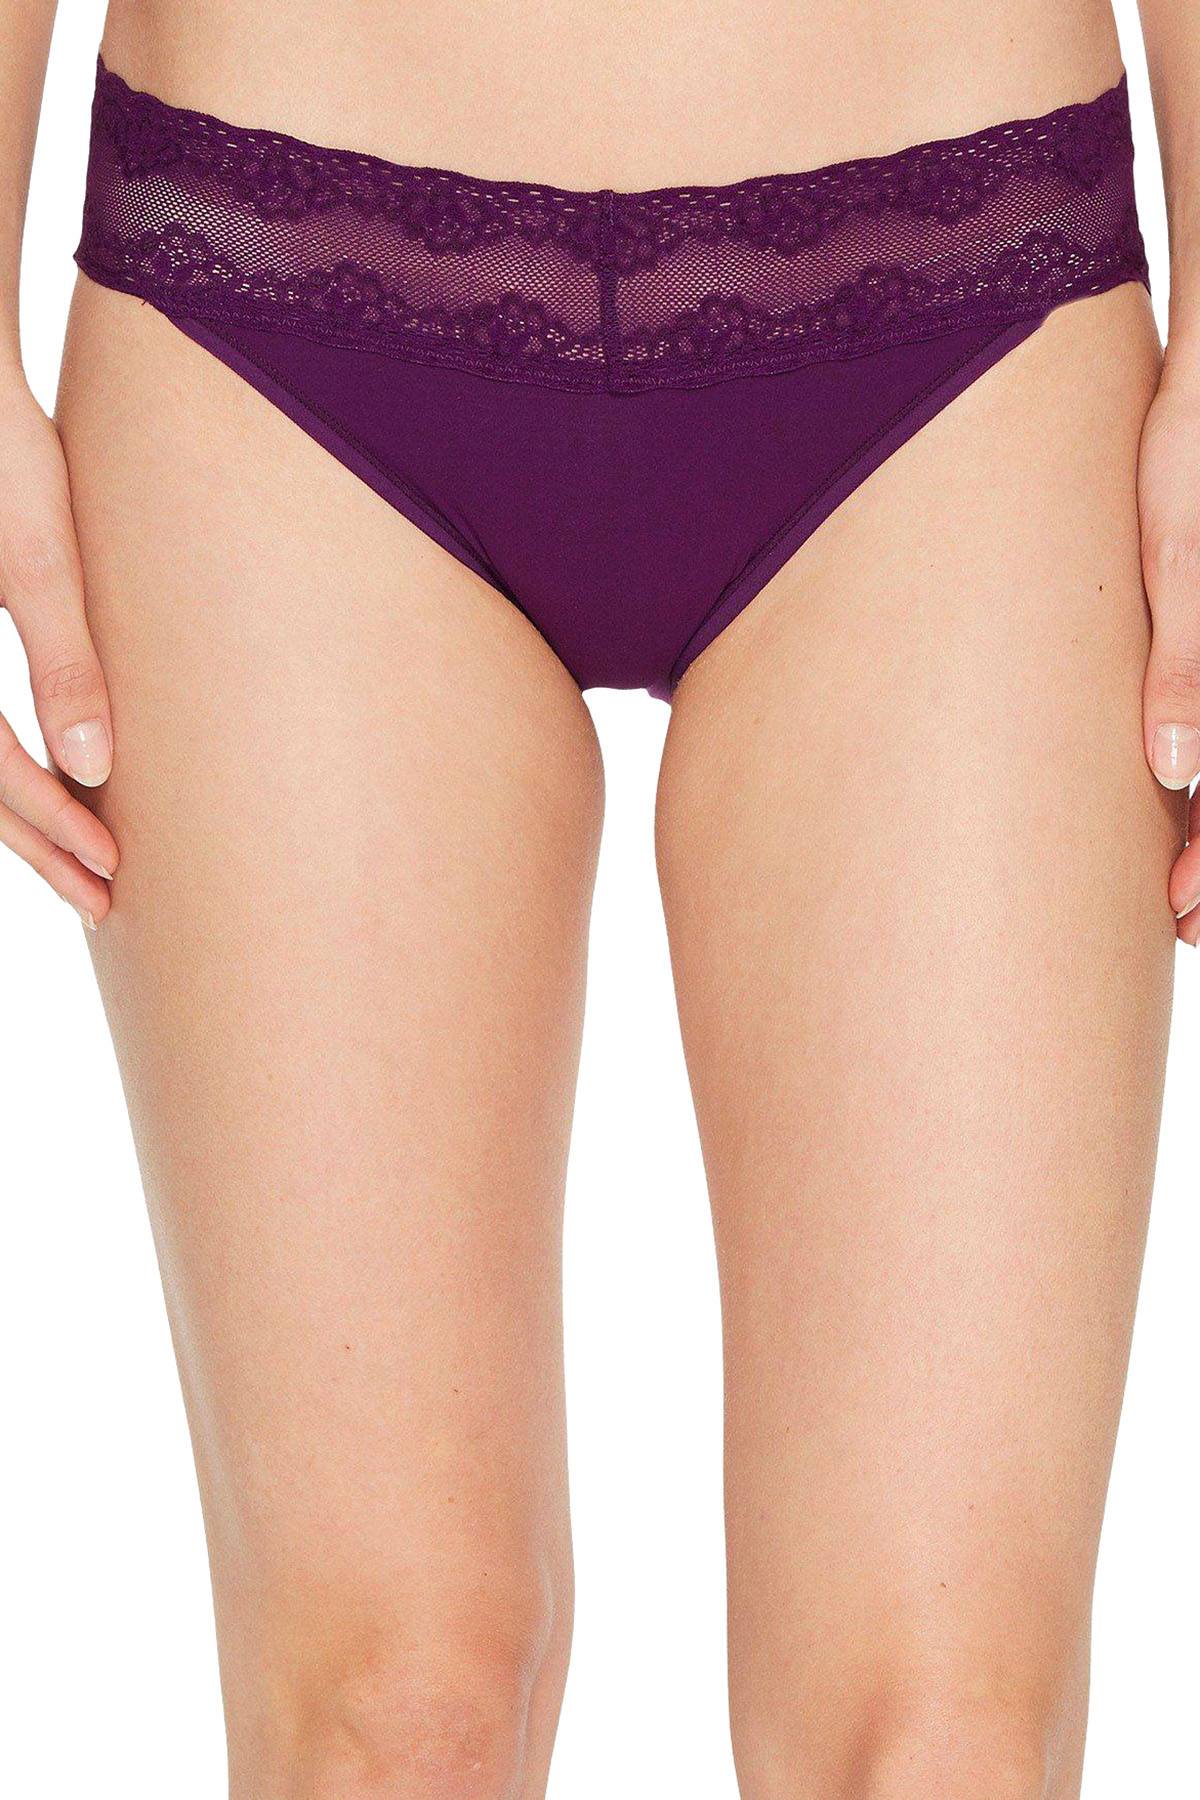 Natori Bliss Perfection Lace Waist V Kini 3 Pack in Blue/Purple/Red